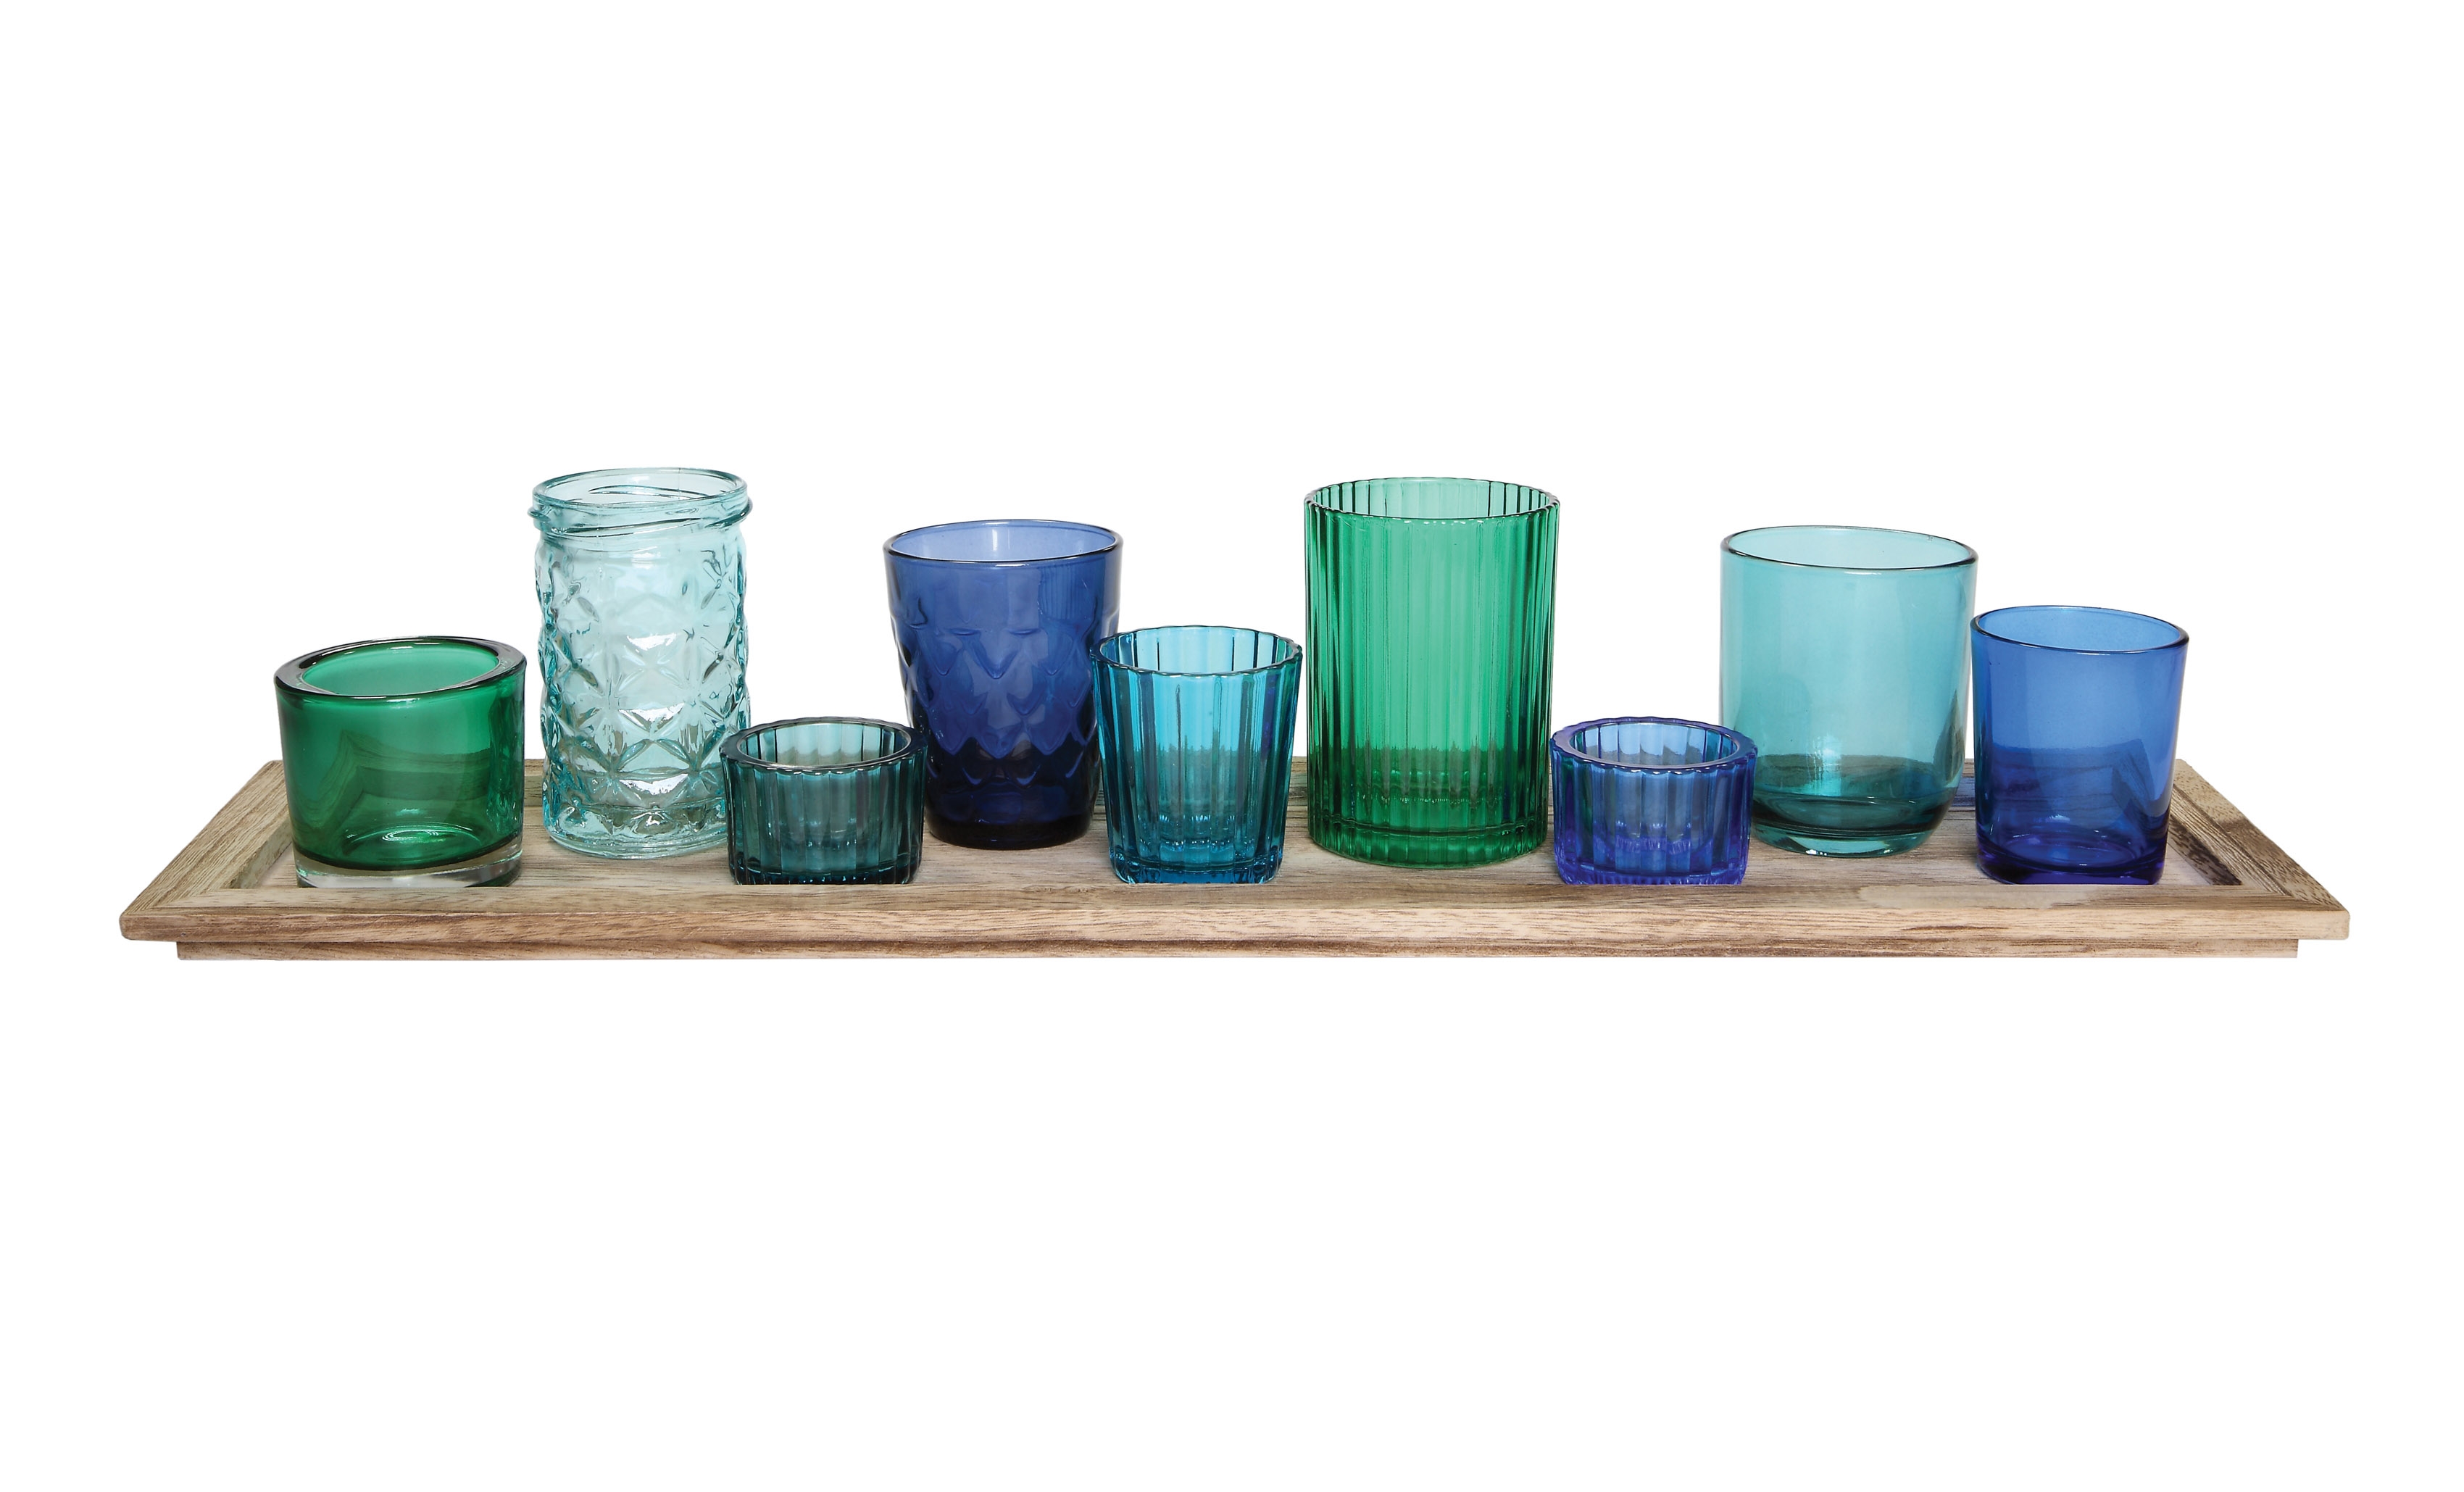 Wood Tray with 9 Blue & Green Glass Votive Holders (Set of 10 Pieces) - Image 0